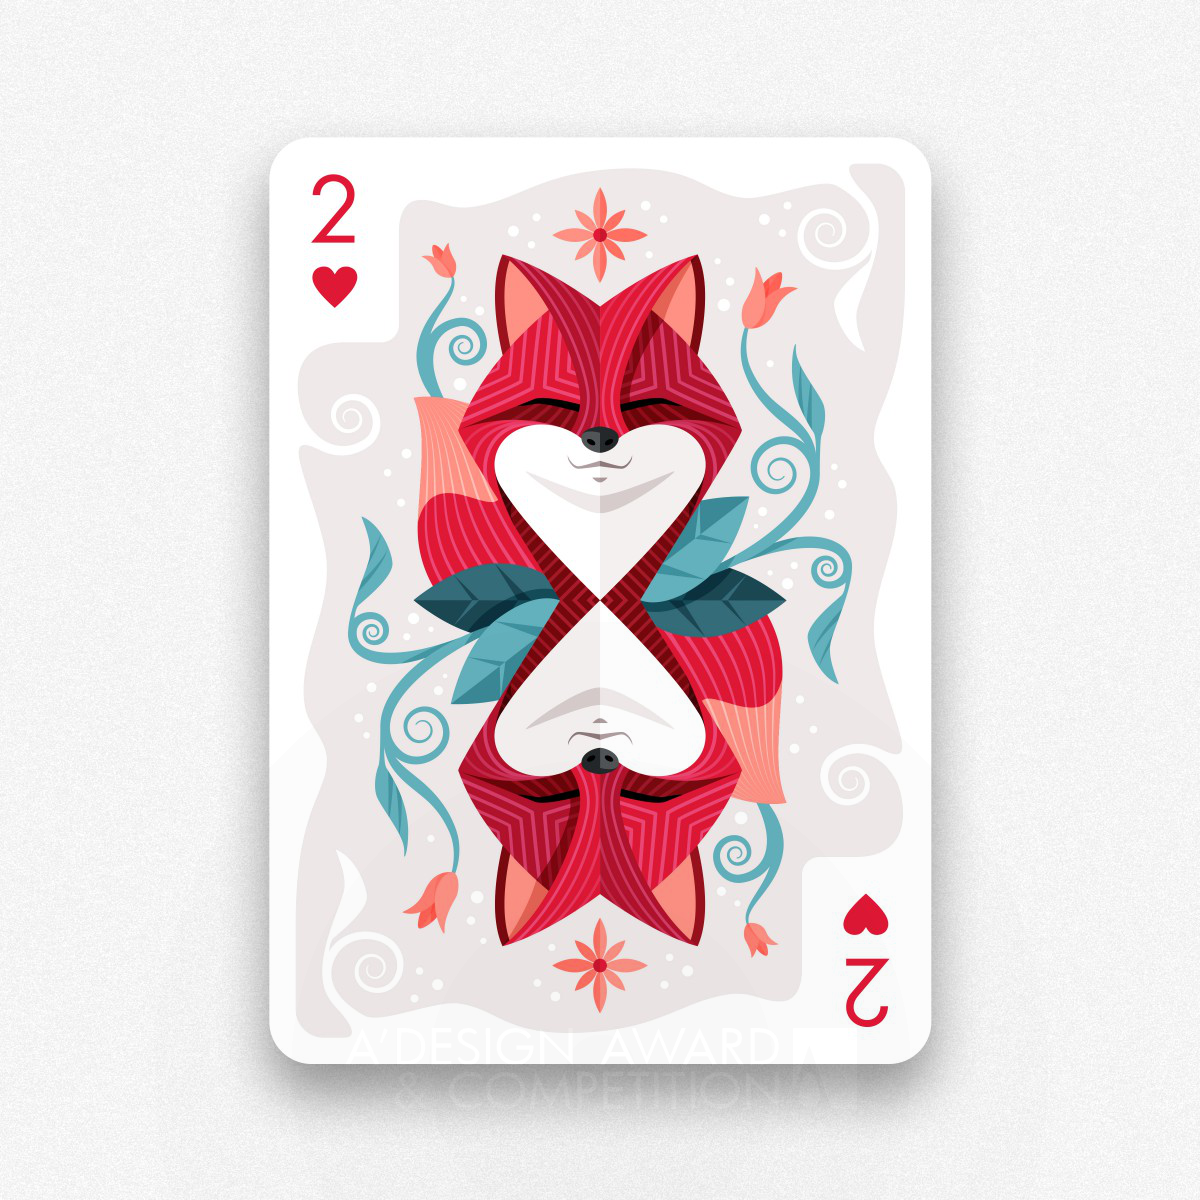 Two of Hearts Illustration by Stefano Rosselli